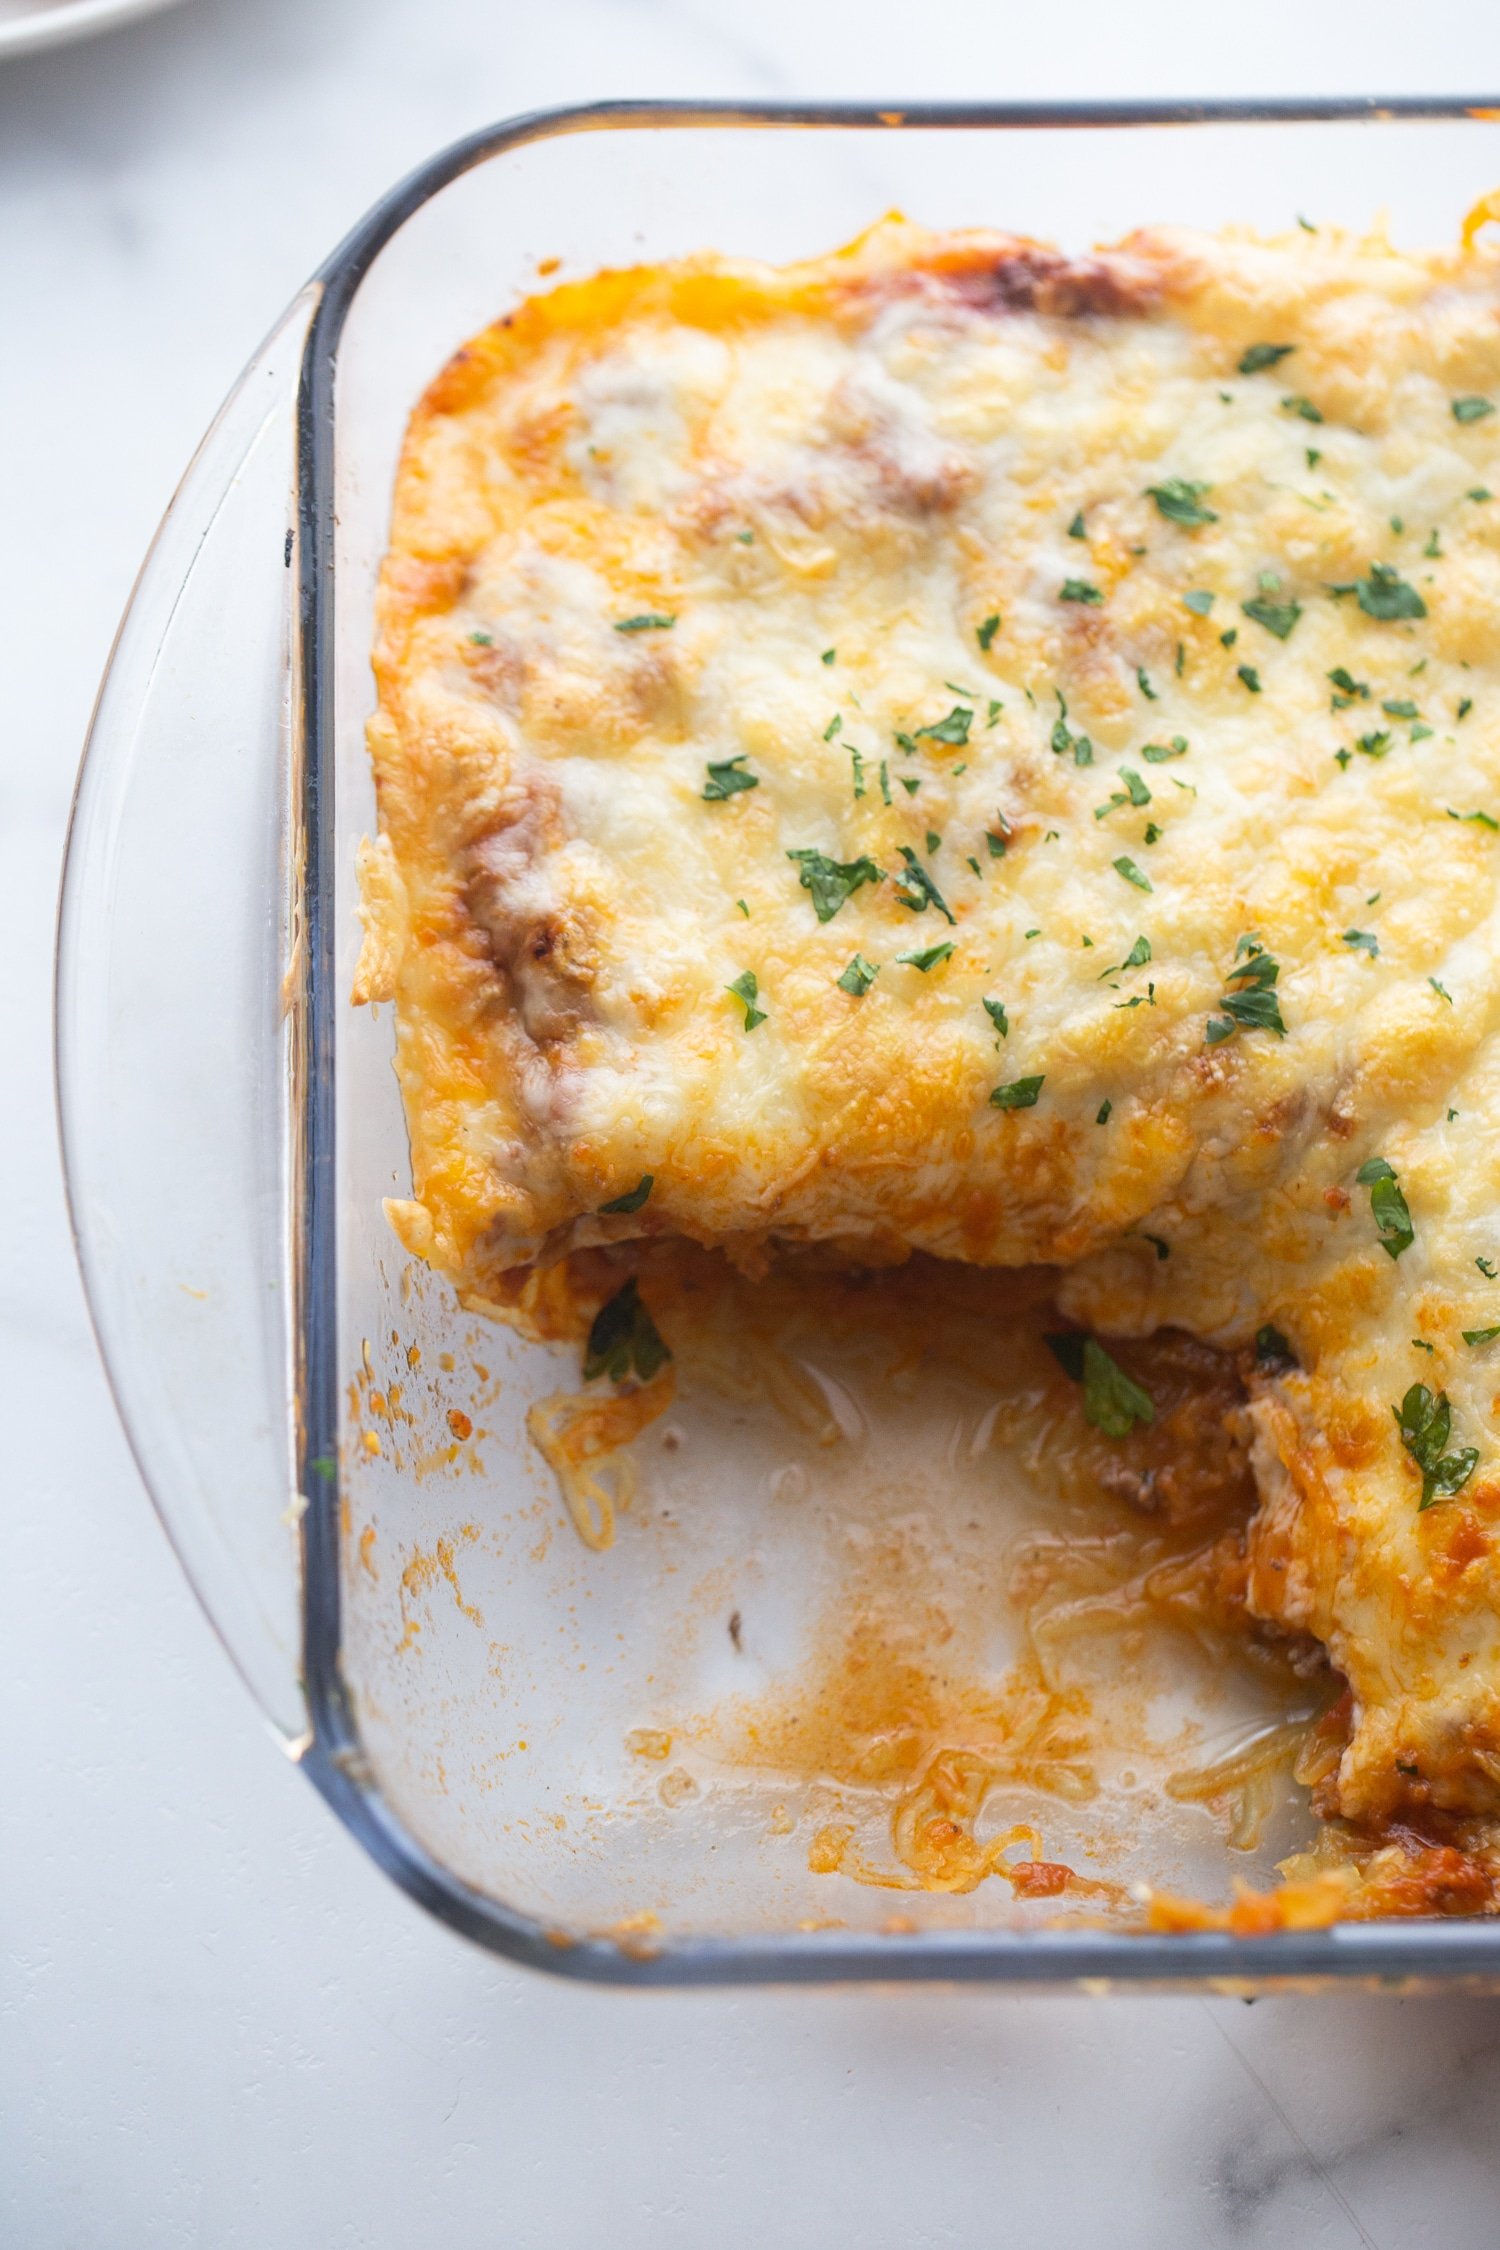 delicious low carb baked italian casserole in a glass baking dish with a piece cut out